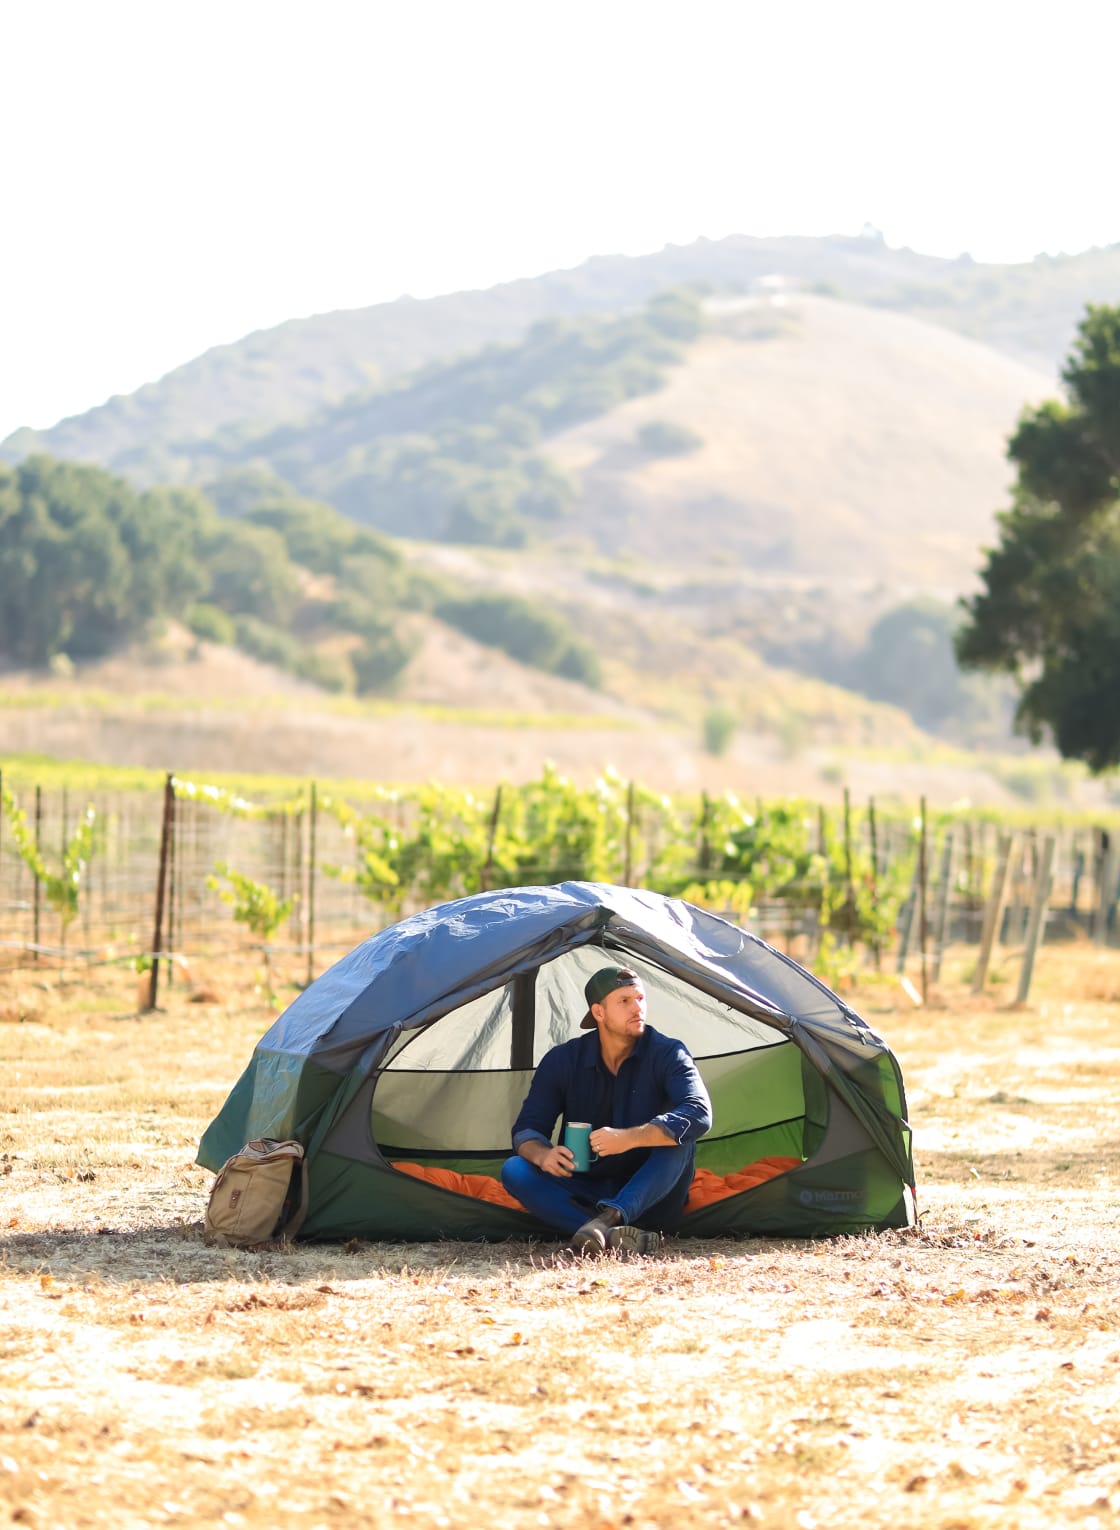 Camping next to the Vineyards 